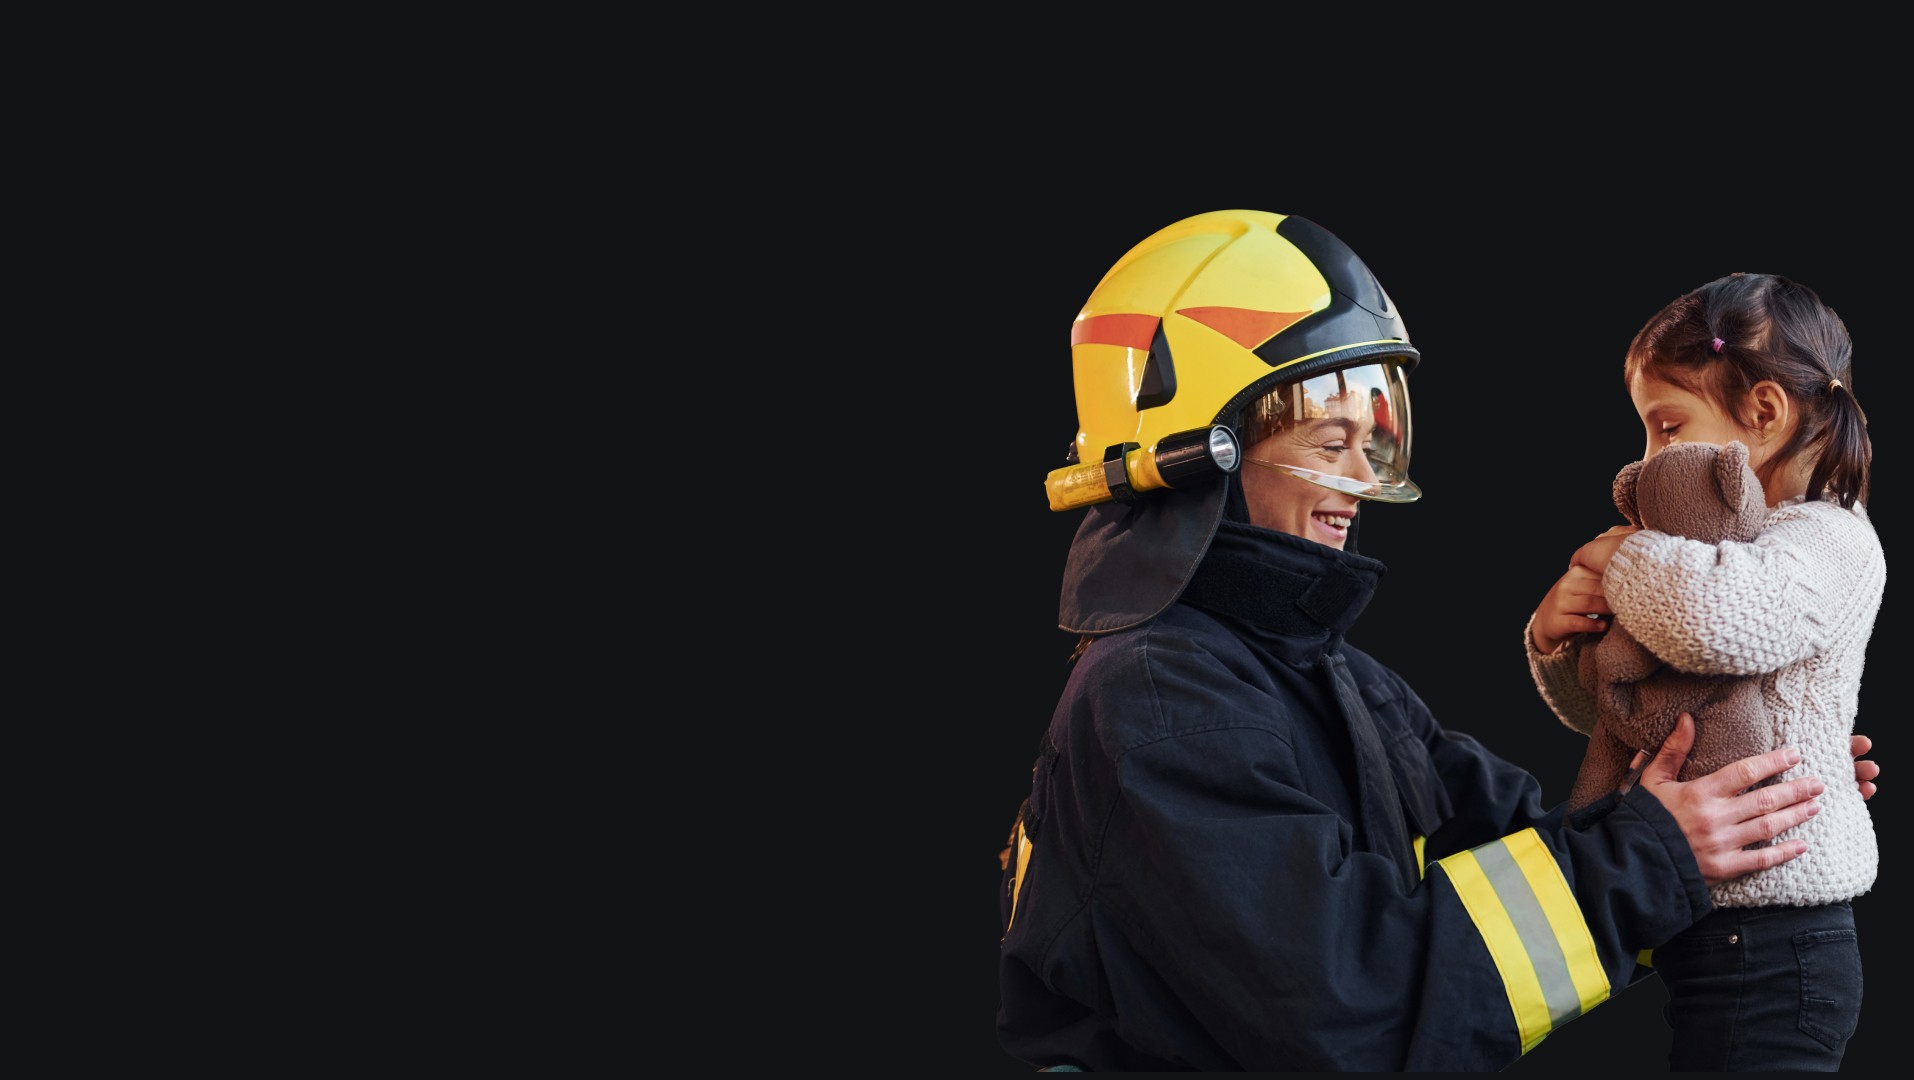 Firefighter woman with a child